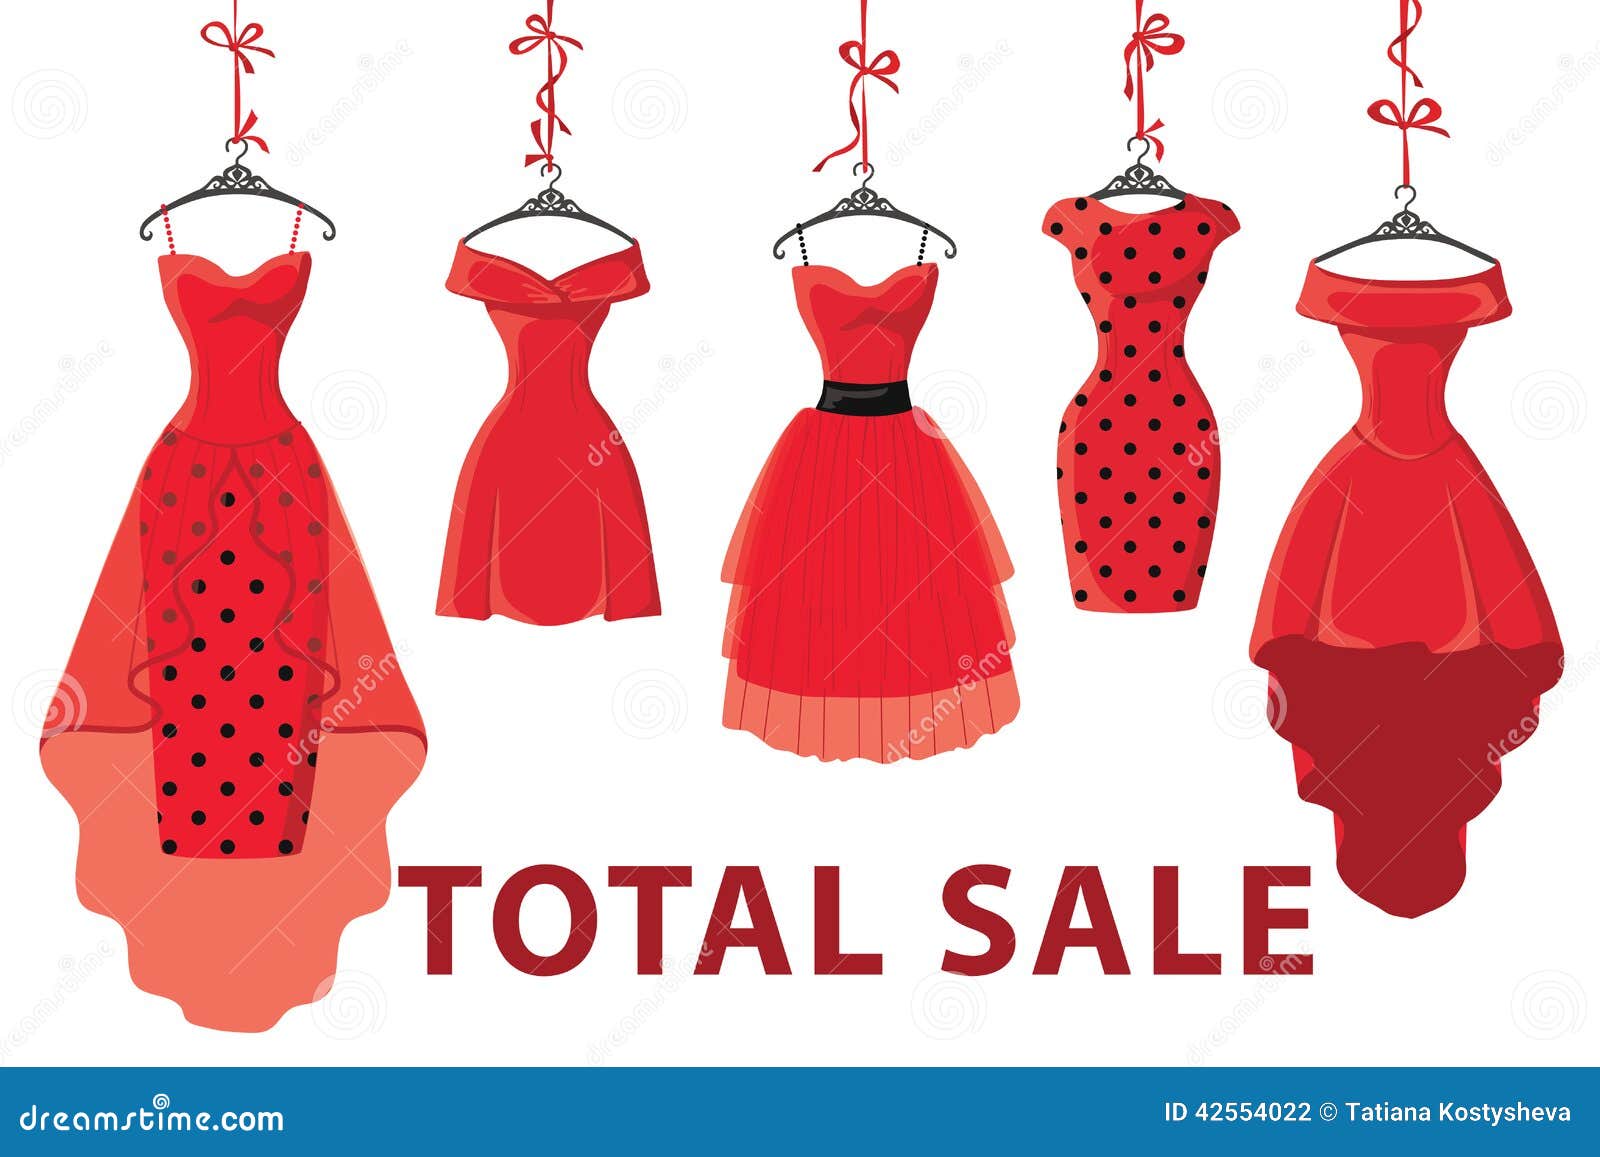 Red Fashion Women&#39;s Dresses Hang On Ribbon.Big Sale Stock Vector - Image: 42554022